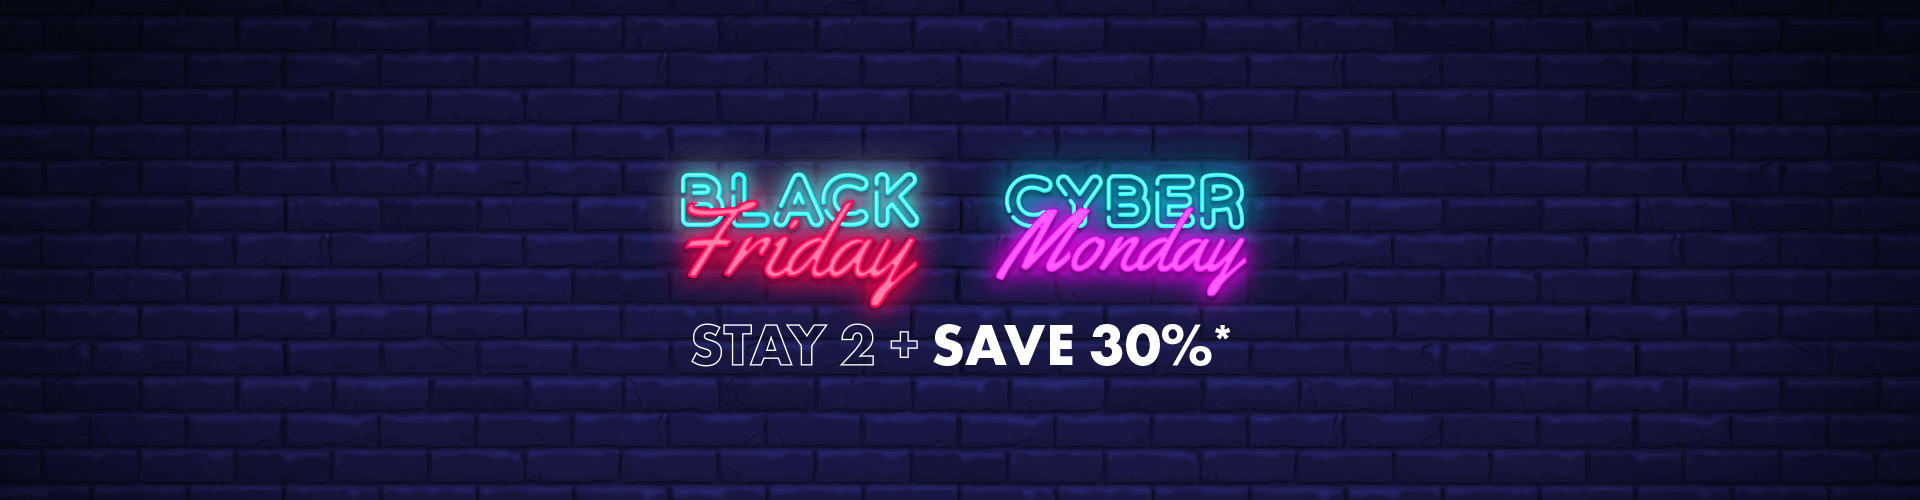 Black Friday and Cyber Monday sale are here! SAVE 30%* when you stay two nights or more at selected Oaks Hotels, Resorts and Suites and experience the best affordable staycation right across Australia and New Zealand.